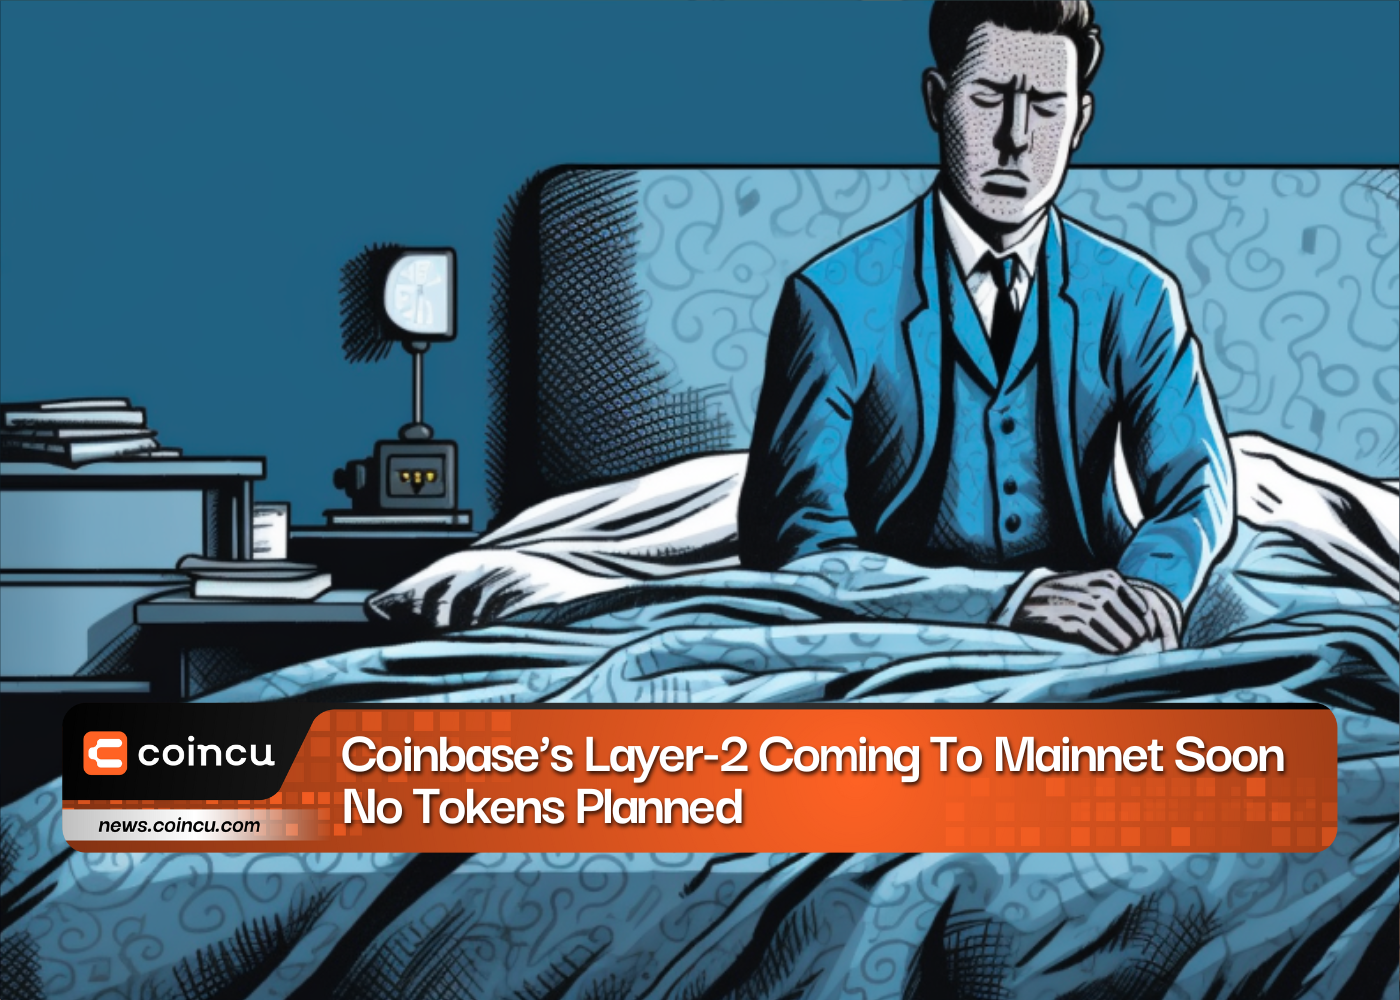 Coinbase's Layer-2 Coming To Mainnet Soon, No Tokens Planned